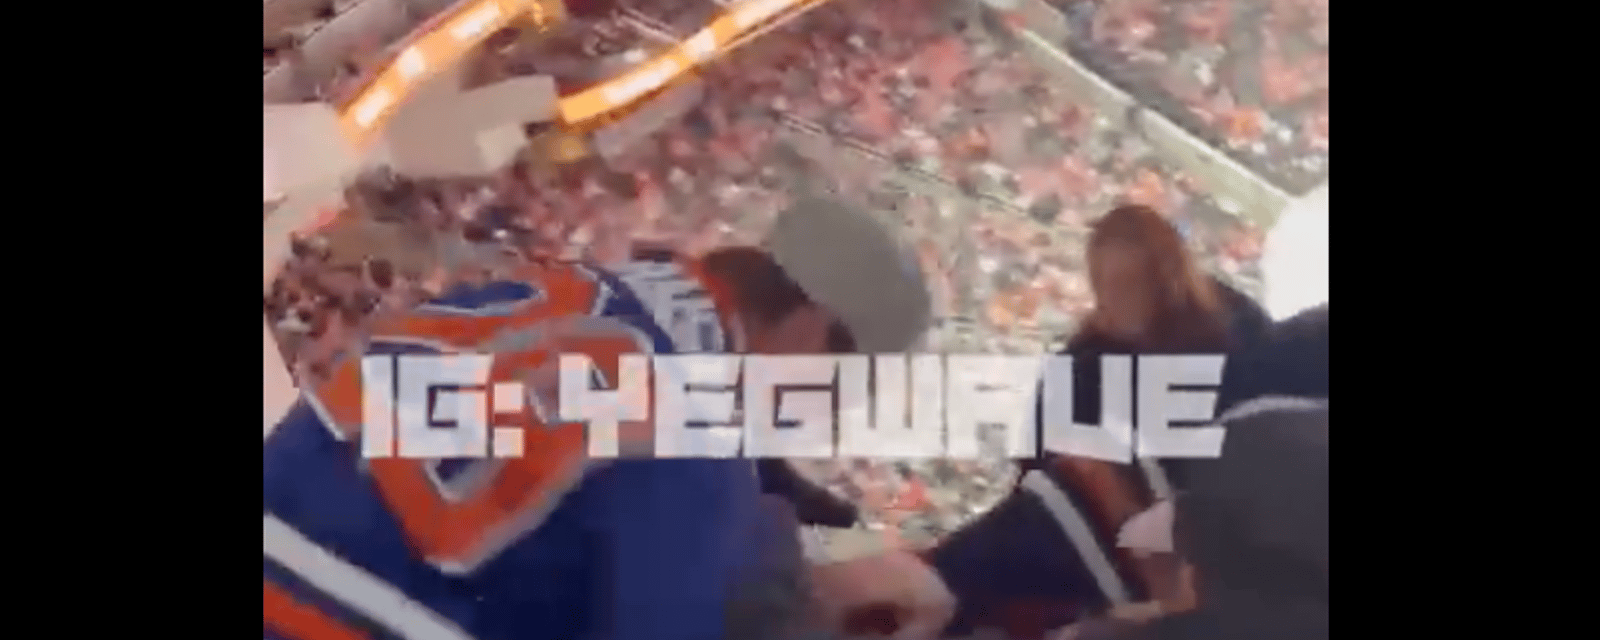 Multiple fan brawls Rogers Place after Oilers loss go viral 